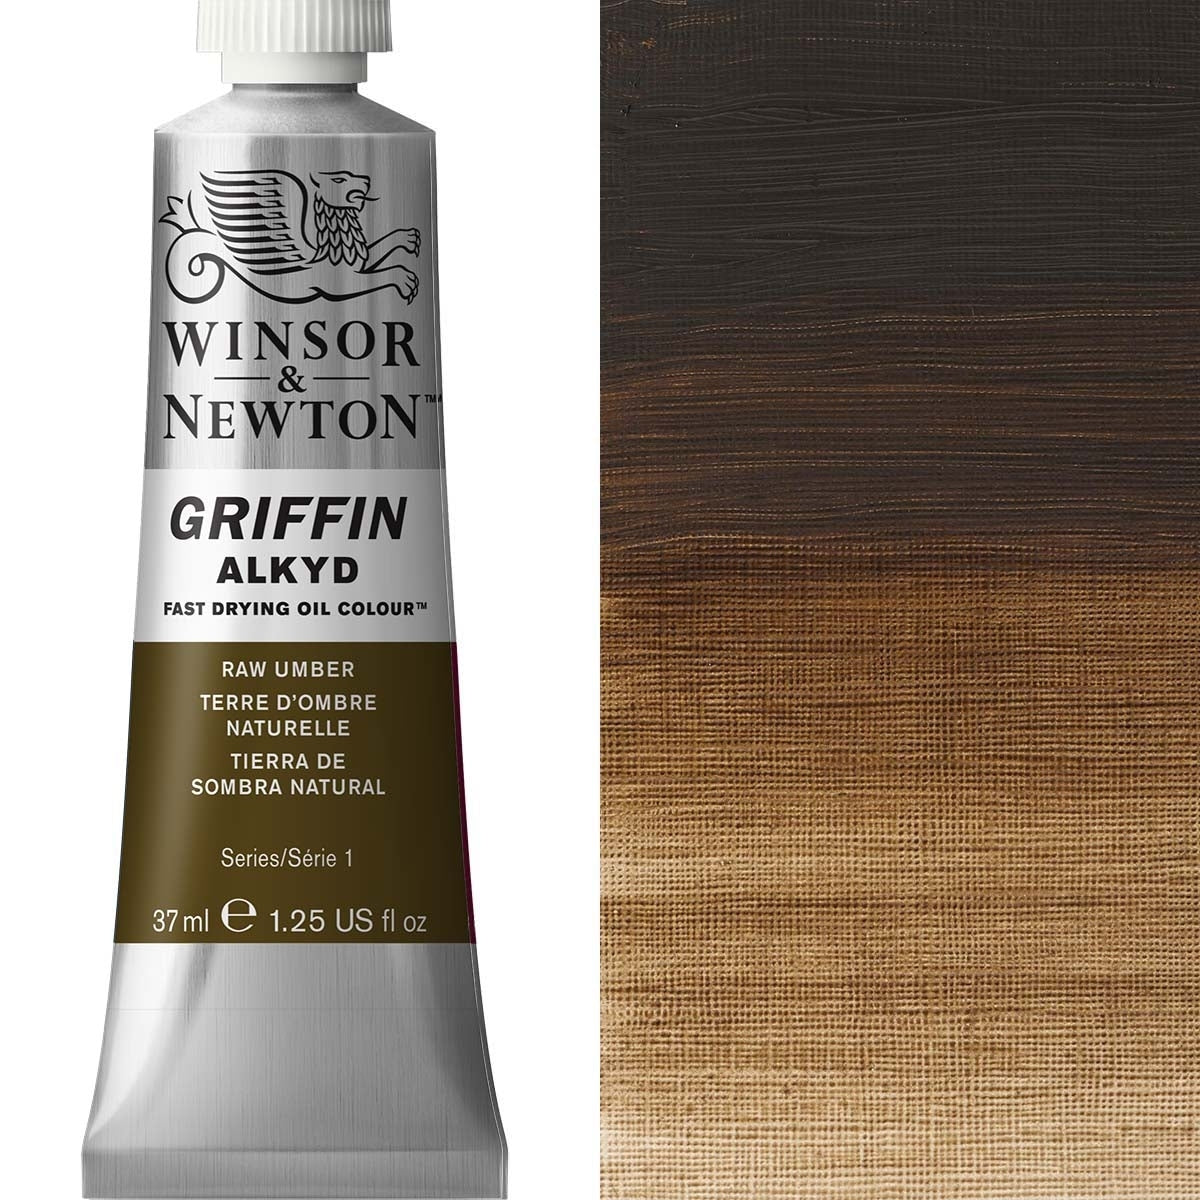 Winsor and Newton - Griffin ALKYD Oil Colour - 37ml - Raw Umber